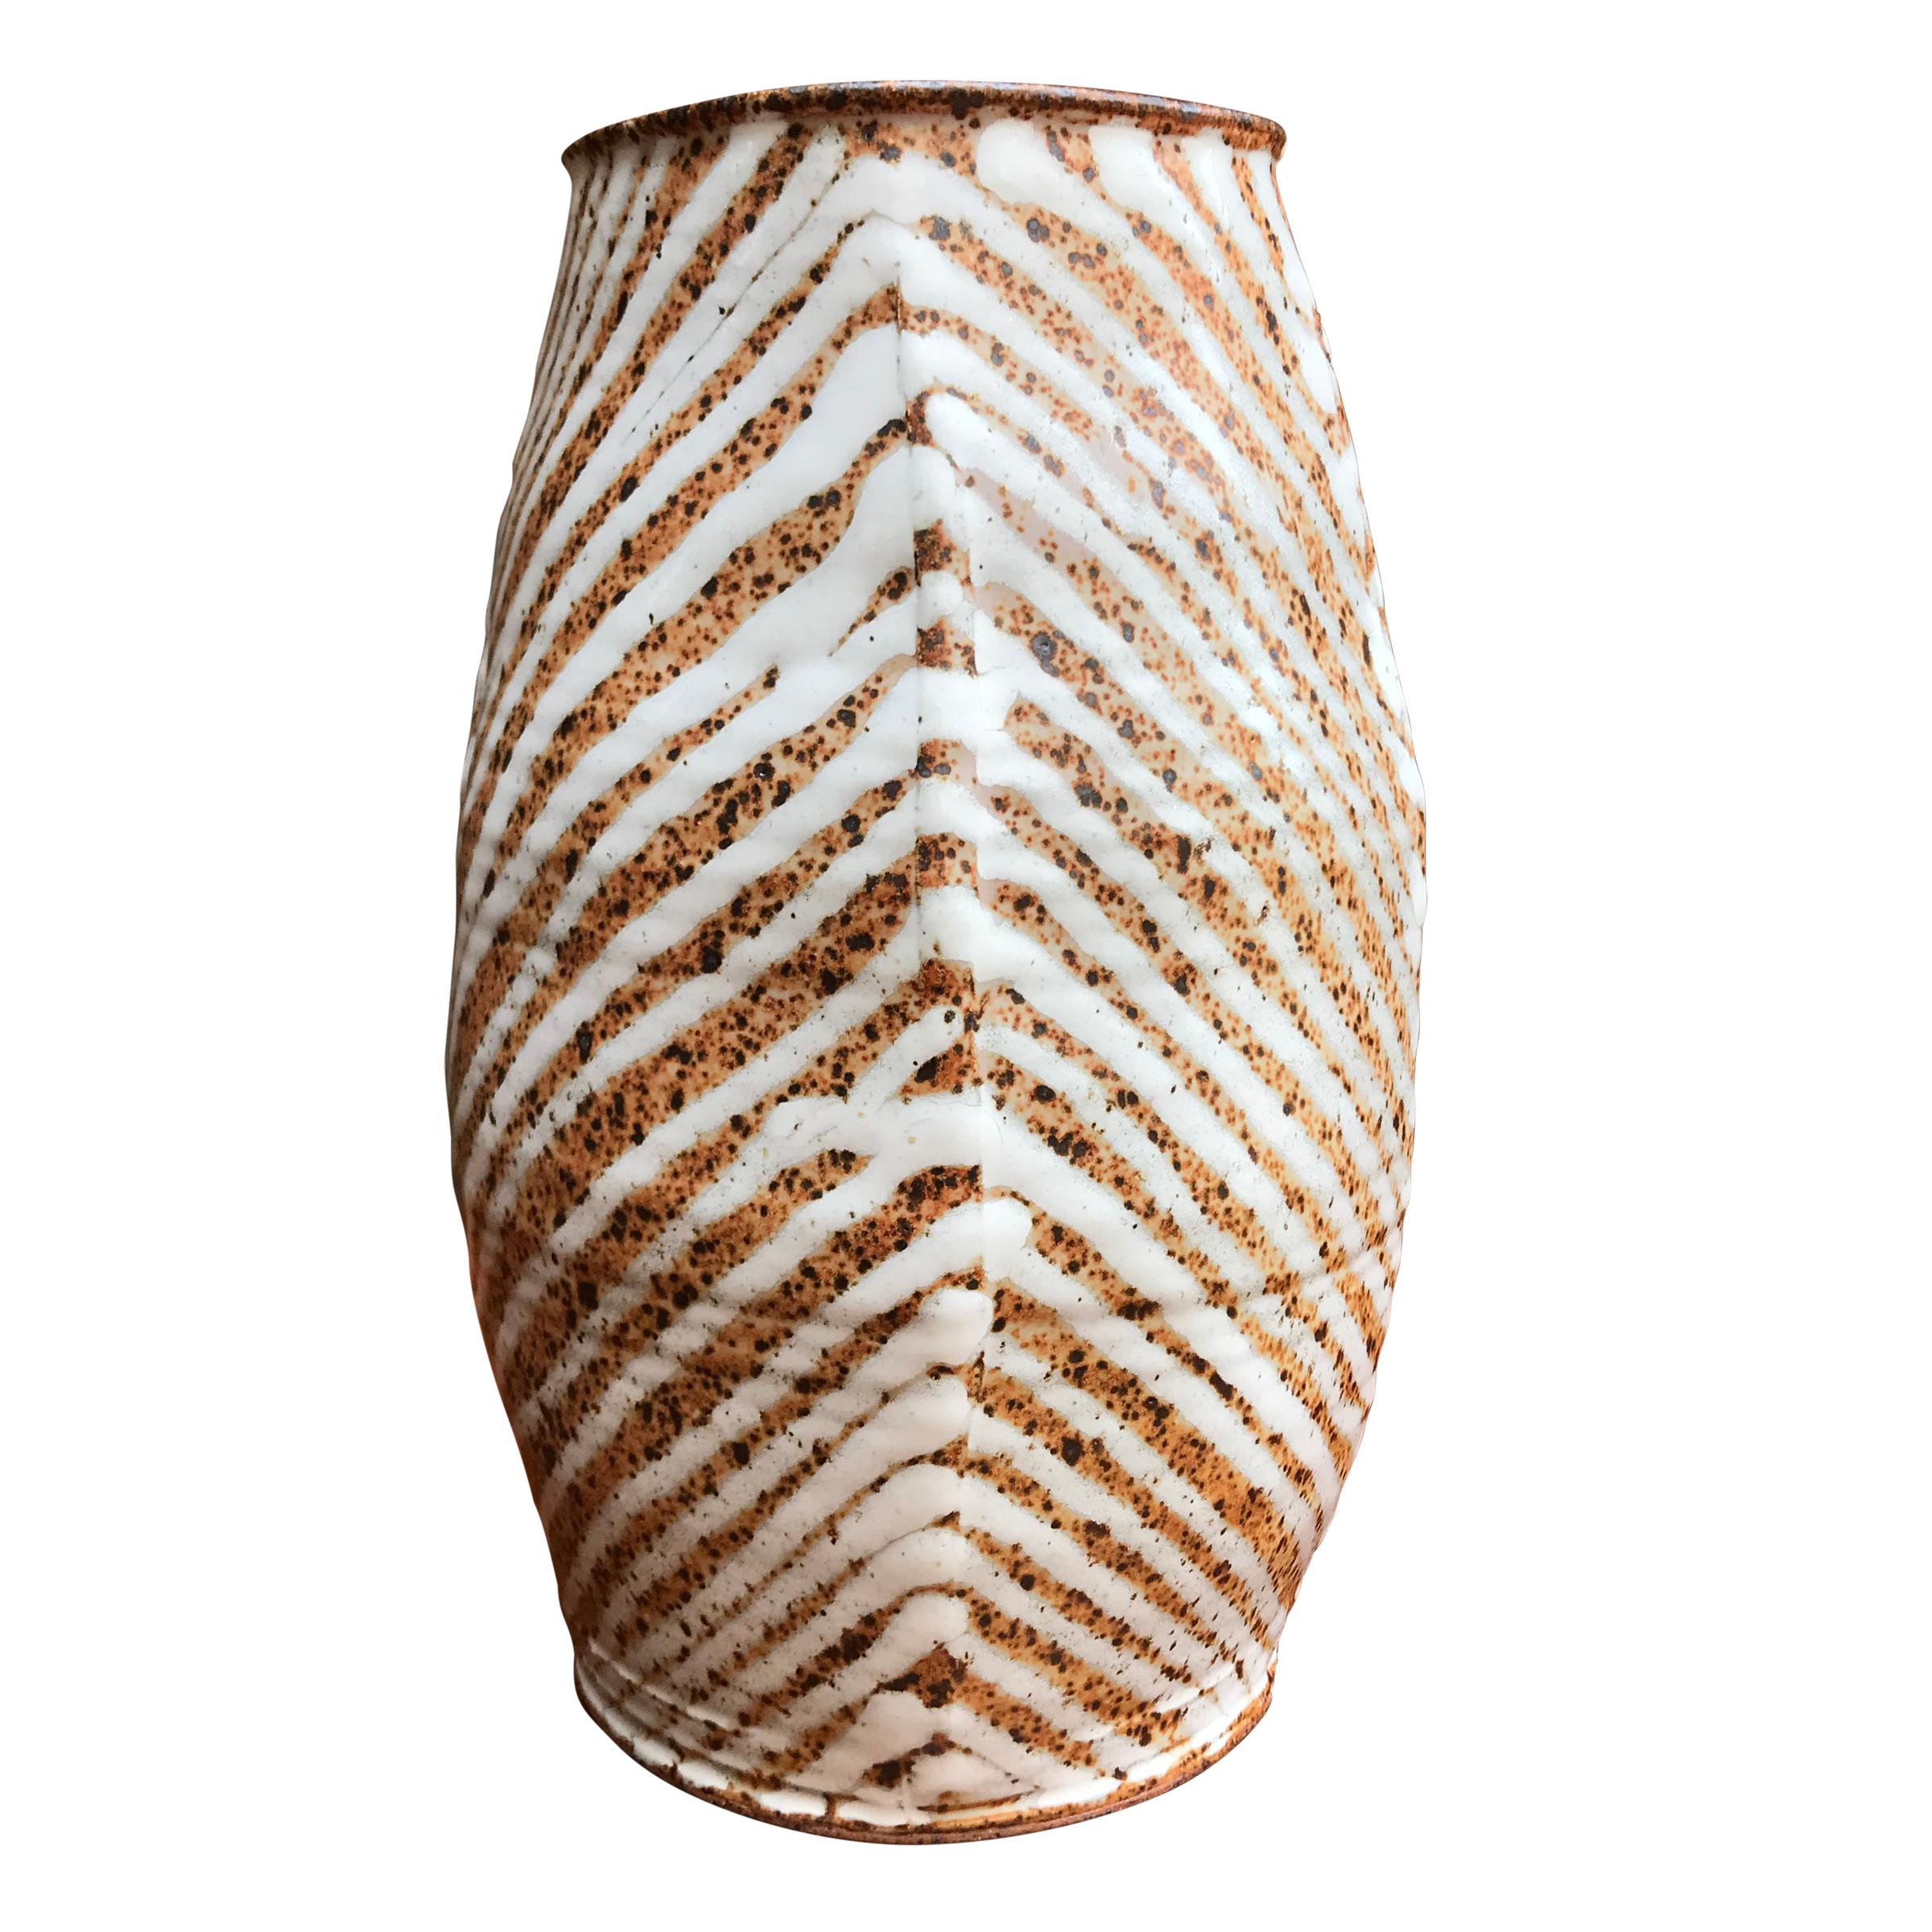 A wonderful mid-20th century wheel-thrown studio pottery vase with vertical ridges at each 